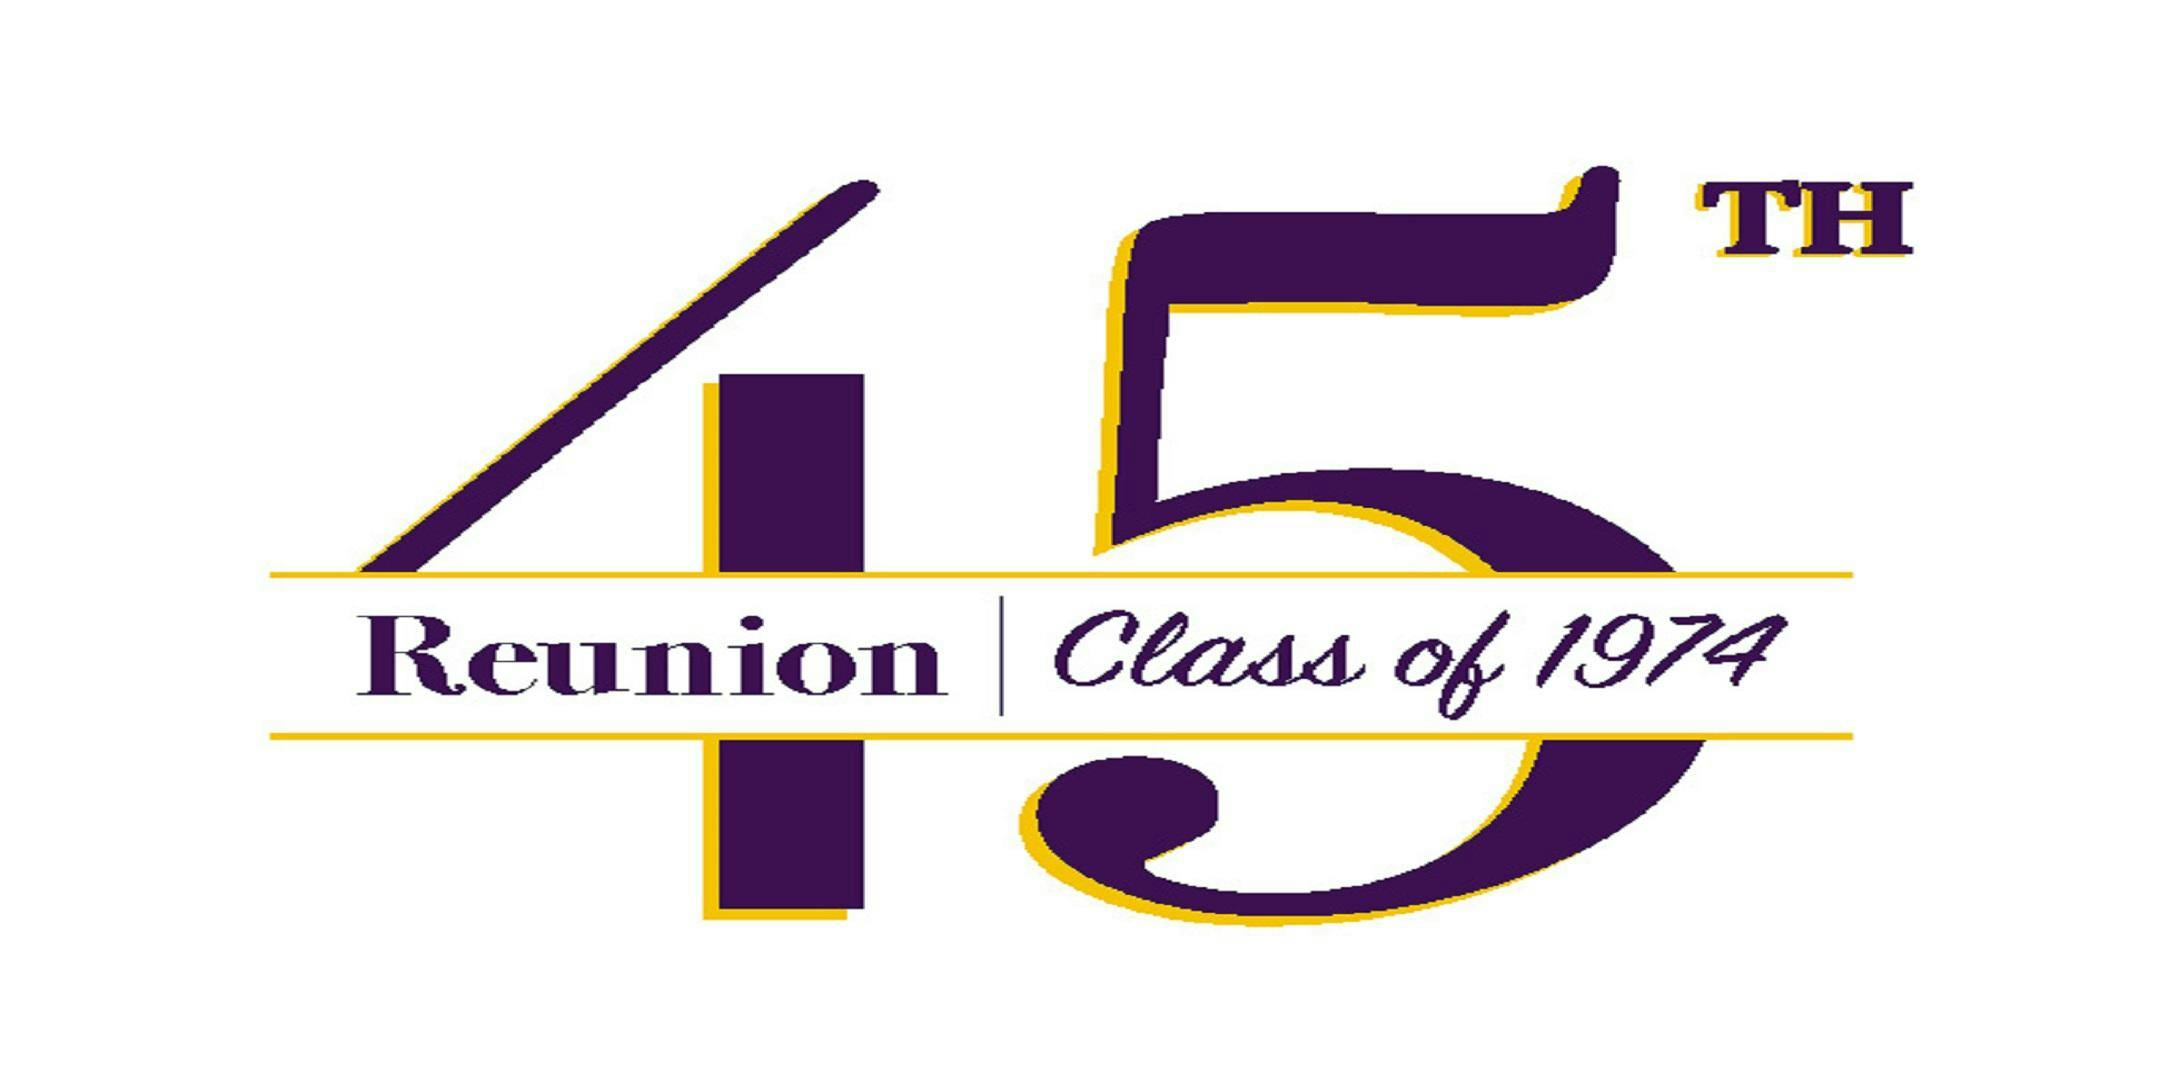 Forest Road Class of 1974 - 45 Year Reunion